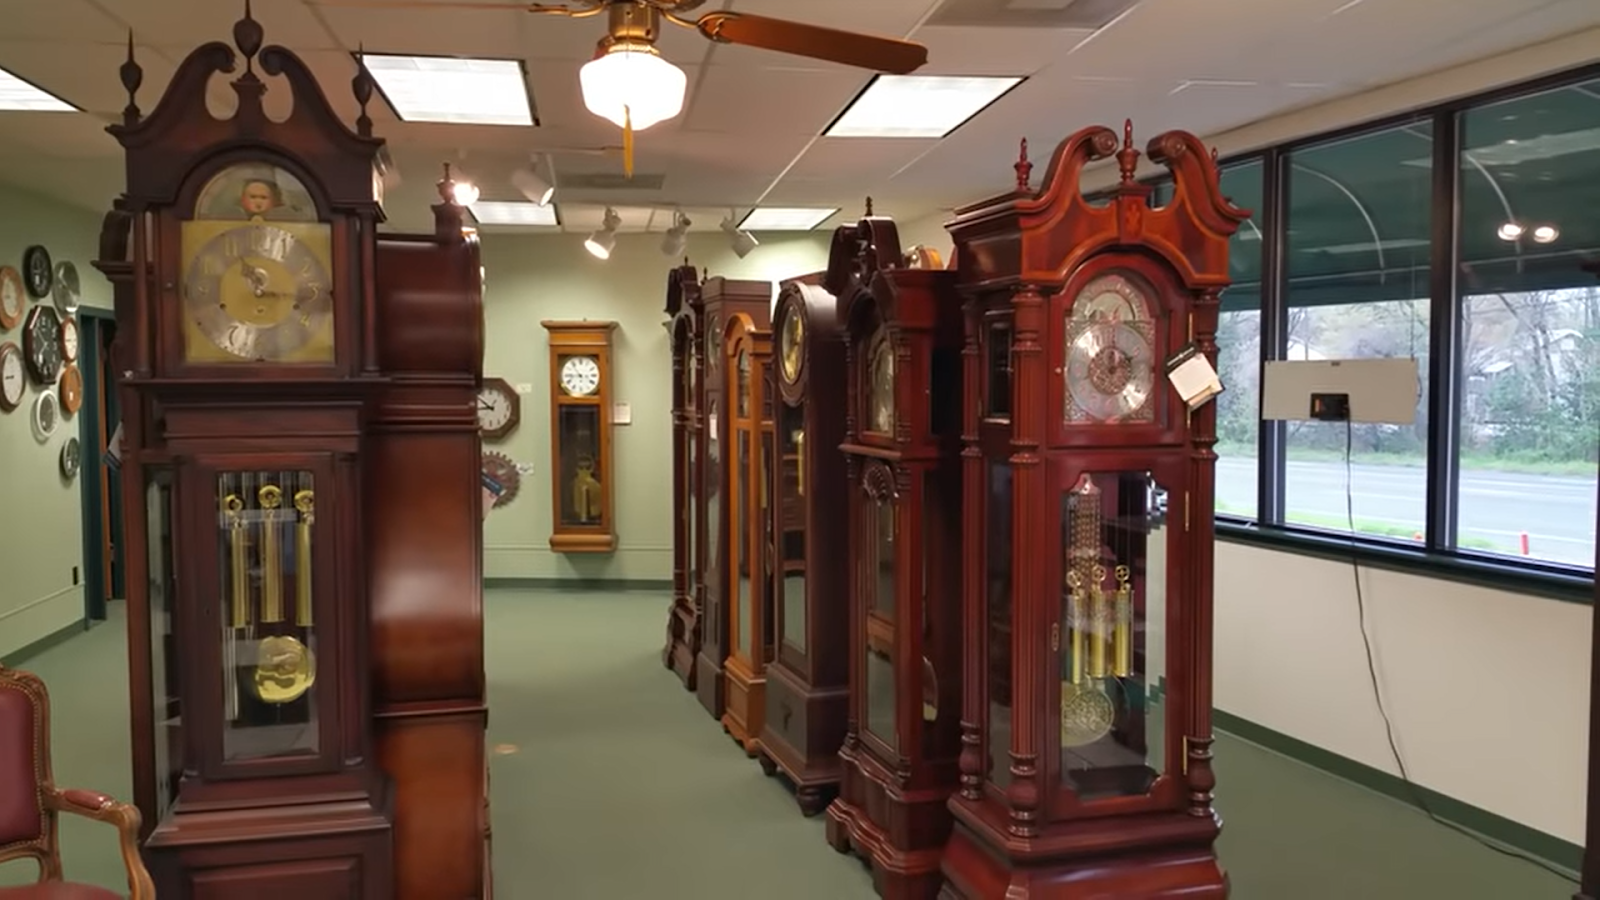 ridgeway grandfather clocks in the room with windows, white light on the ceiling above